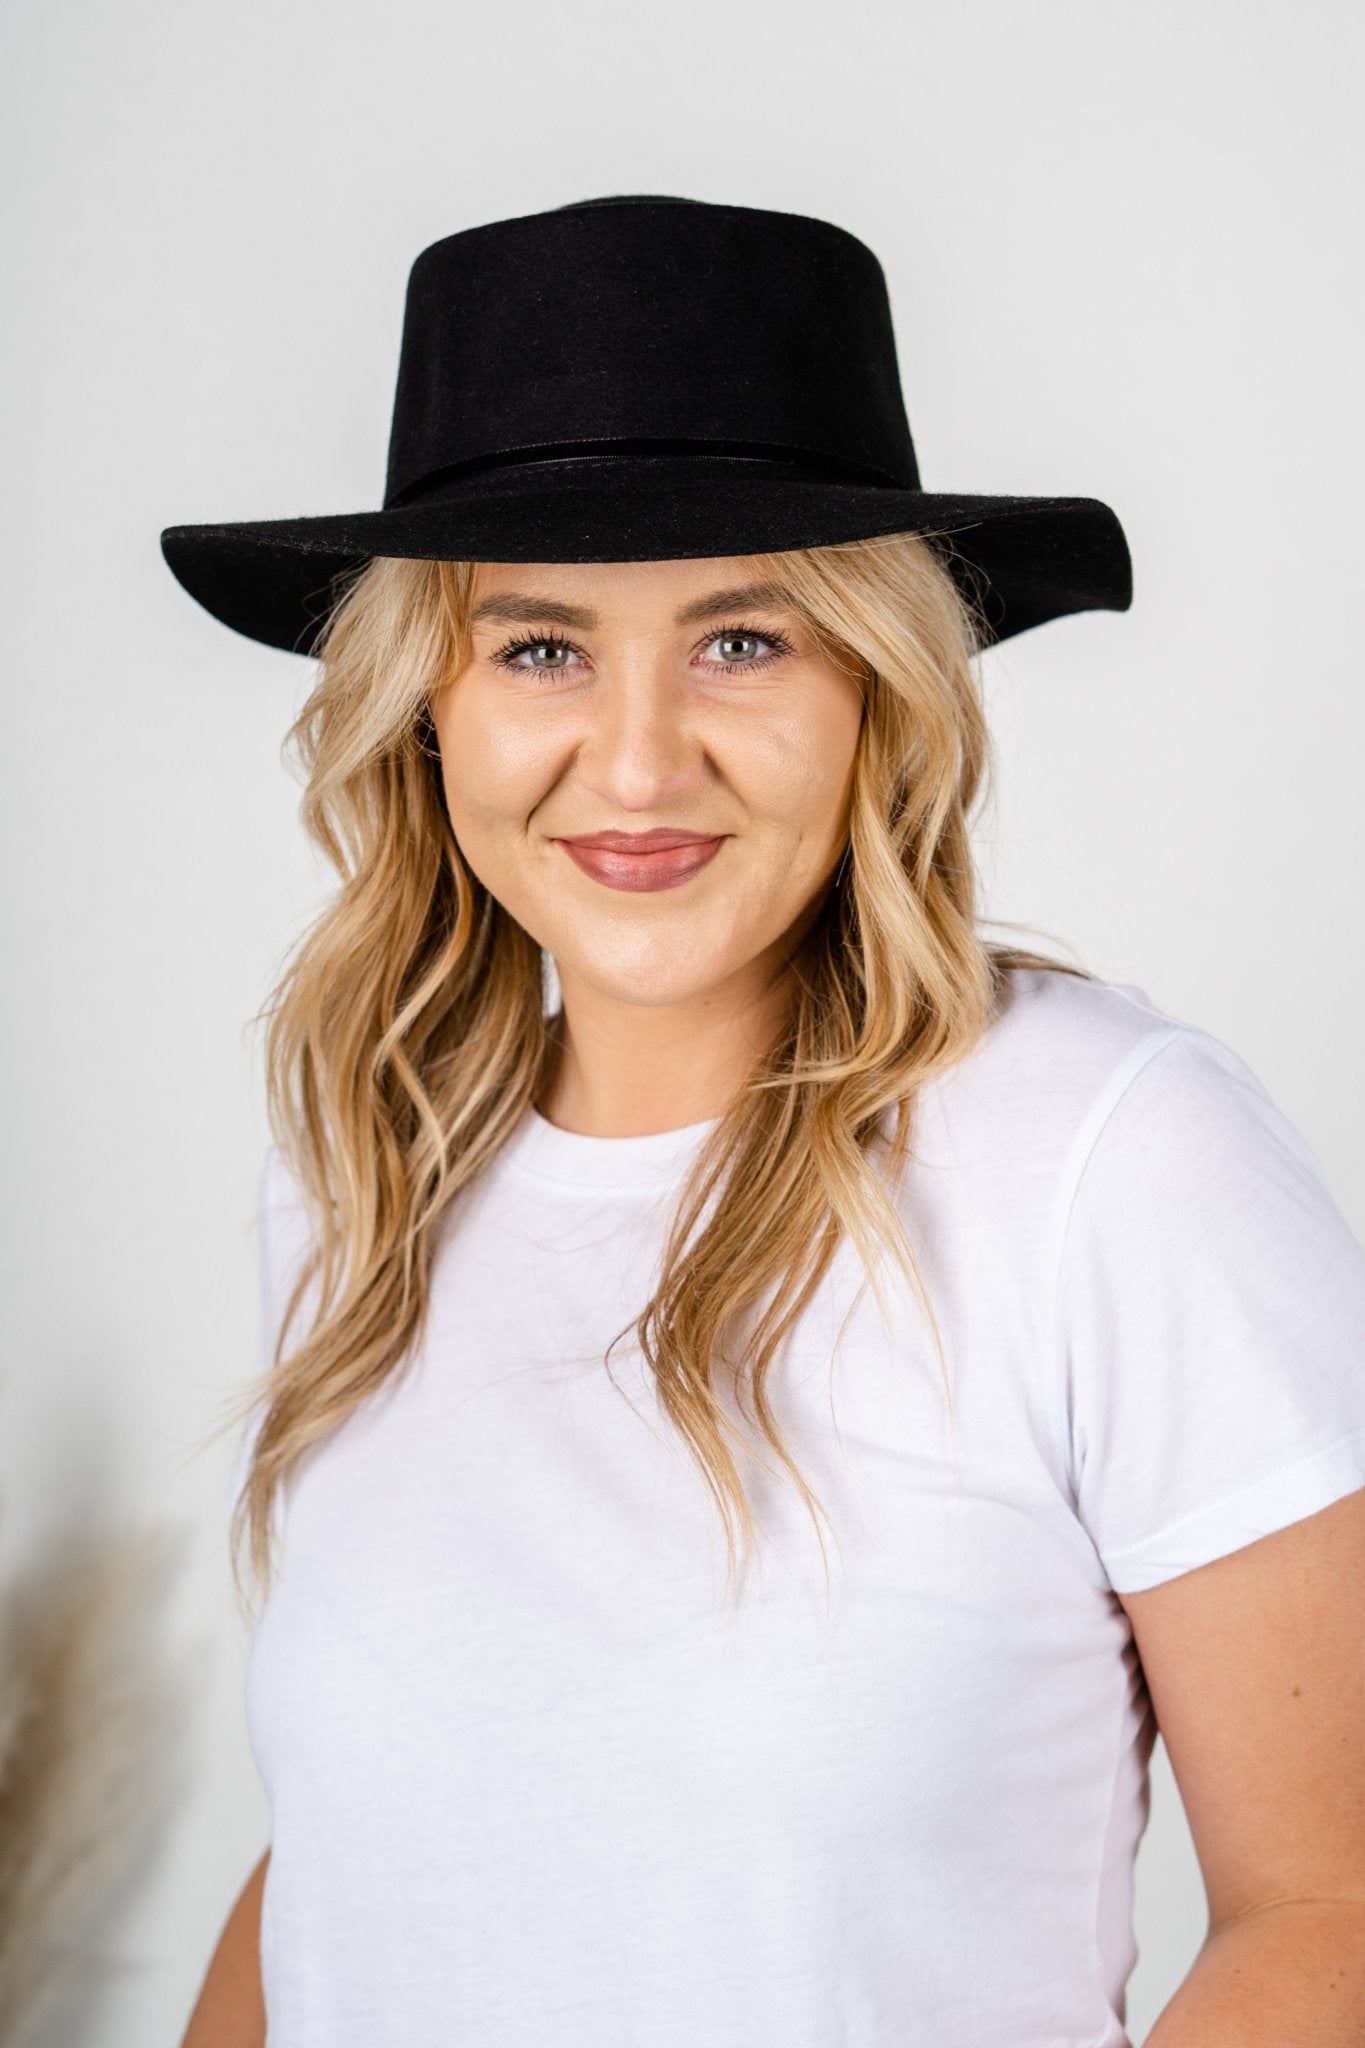 Small round brim hat black - Trendy Hats at Lush Fashion Lounge Boutique in Oklahoma City